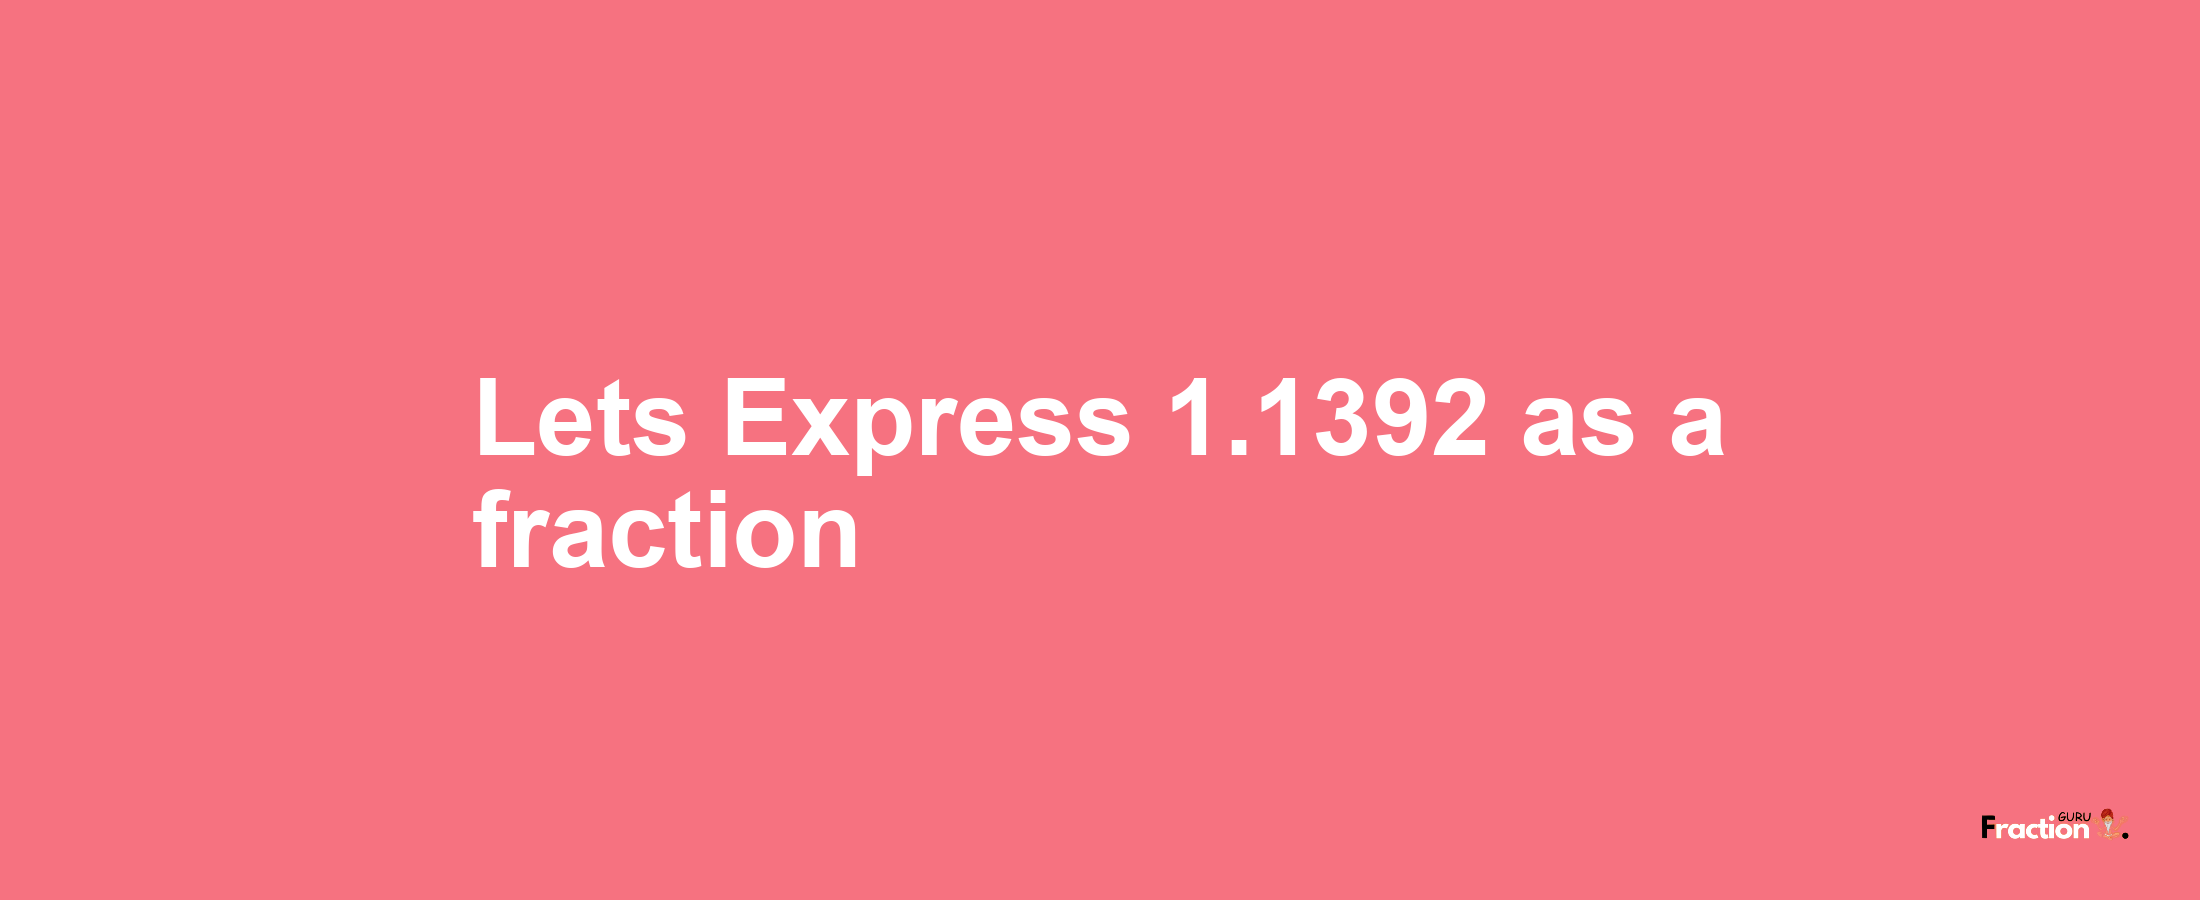 Lets Express 1.1392 as afraction